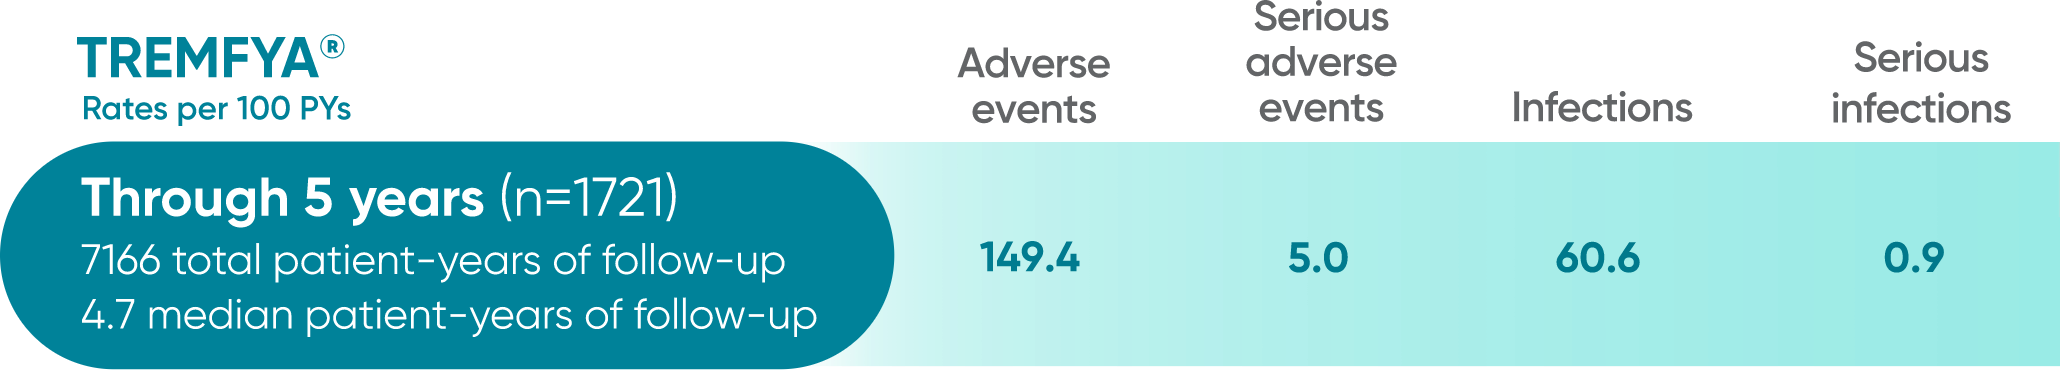 VOYAGE 1 and VOYAGE 2 adverse events data table